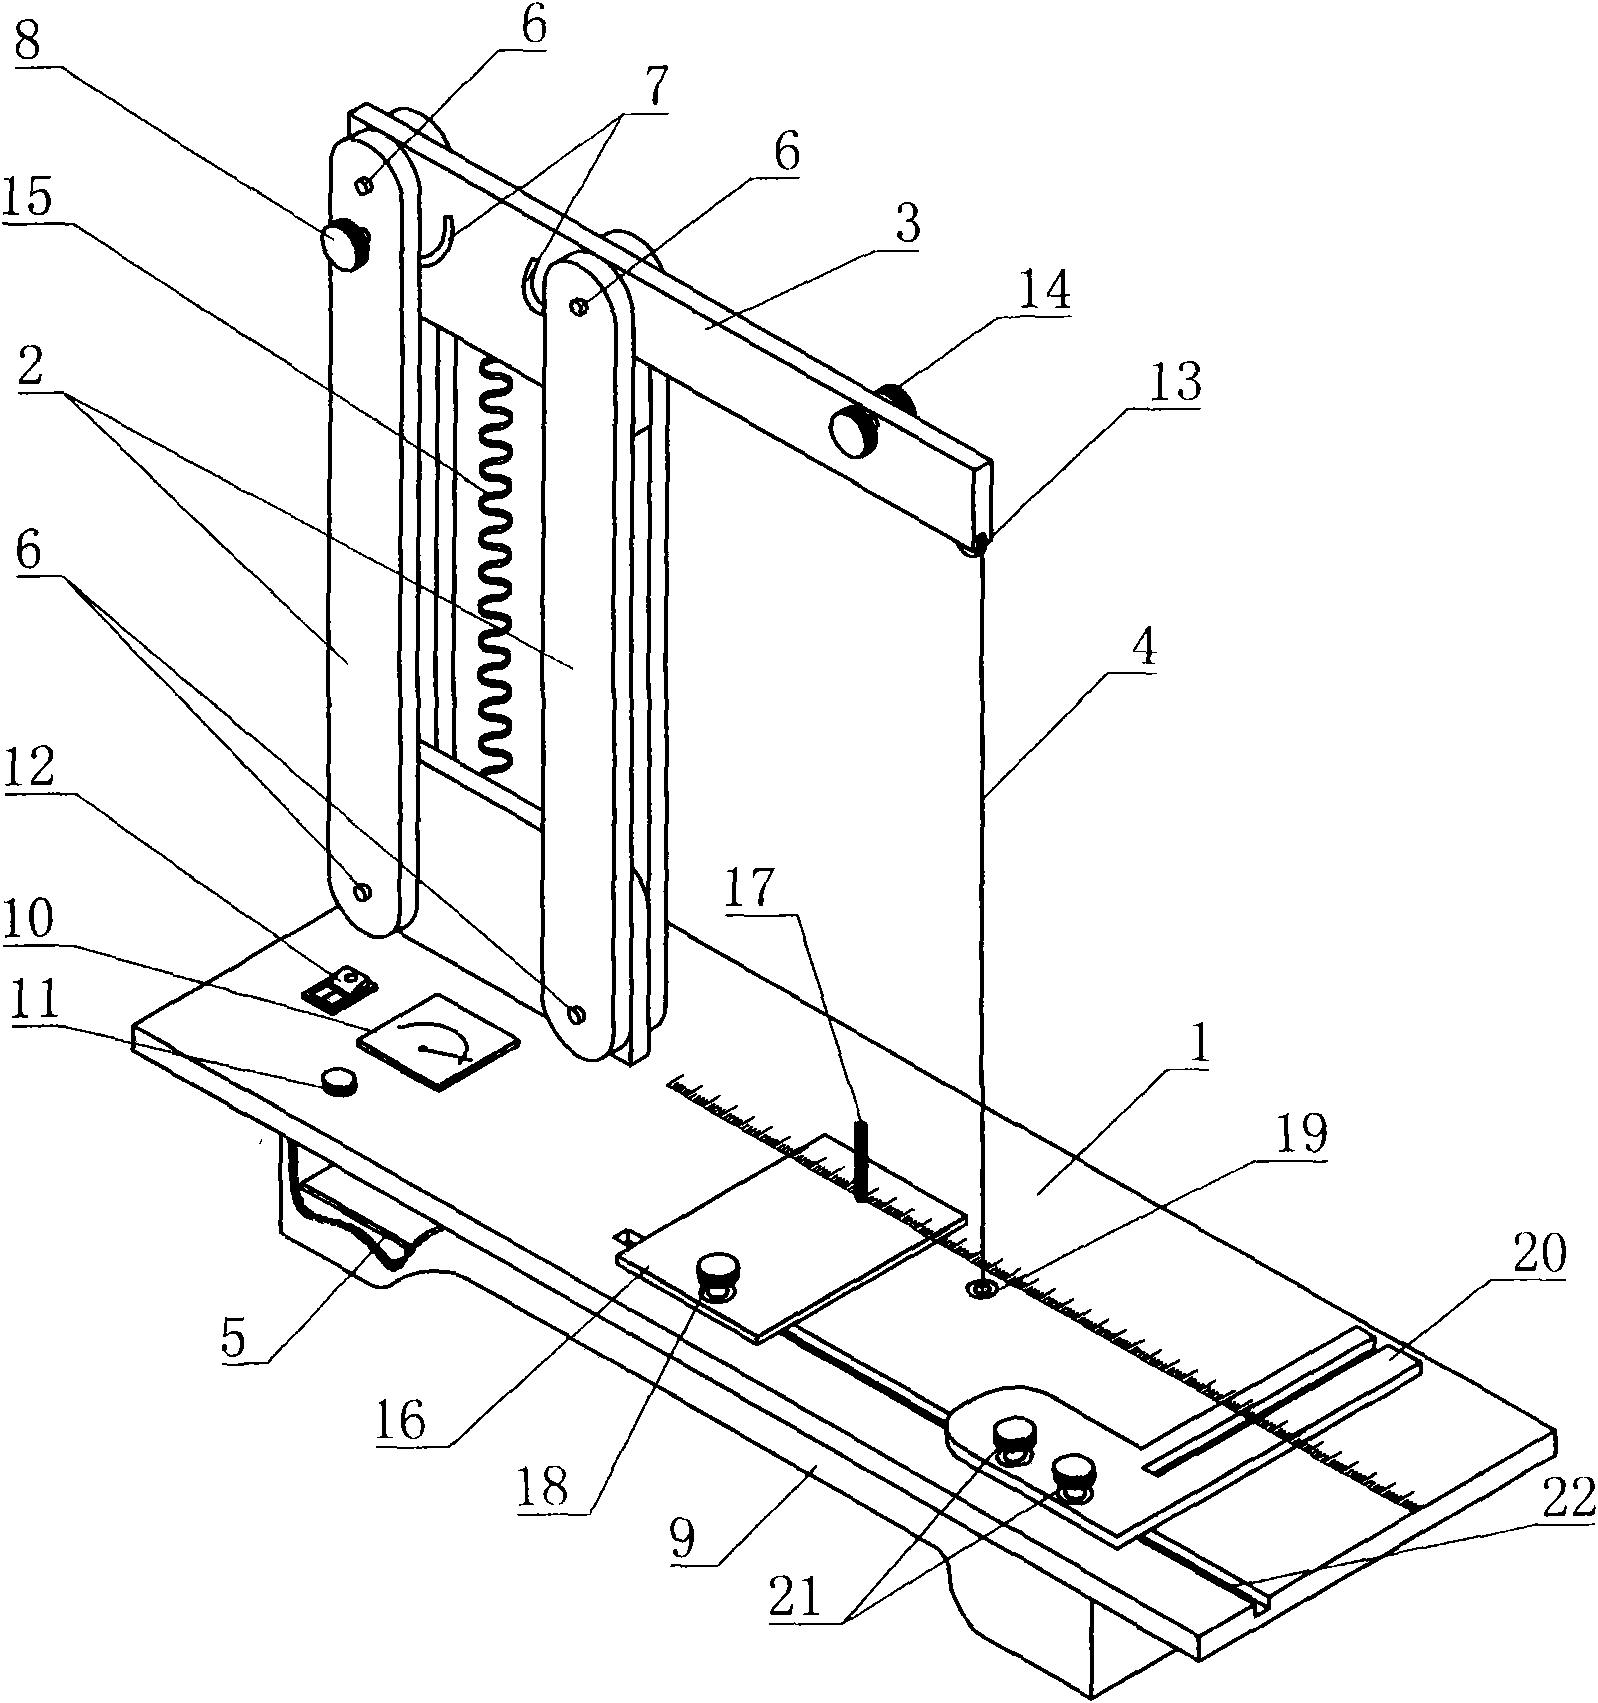 Electrothermal cutting machine with automatic voltage-stabilized and constant-current device